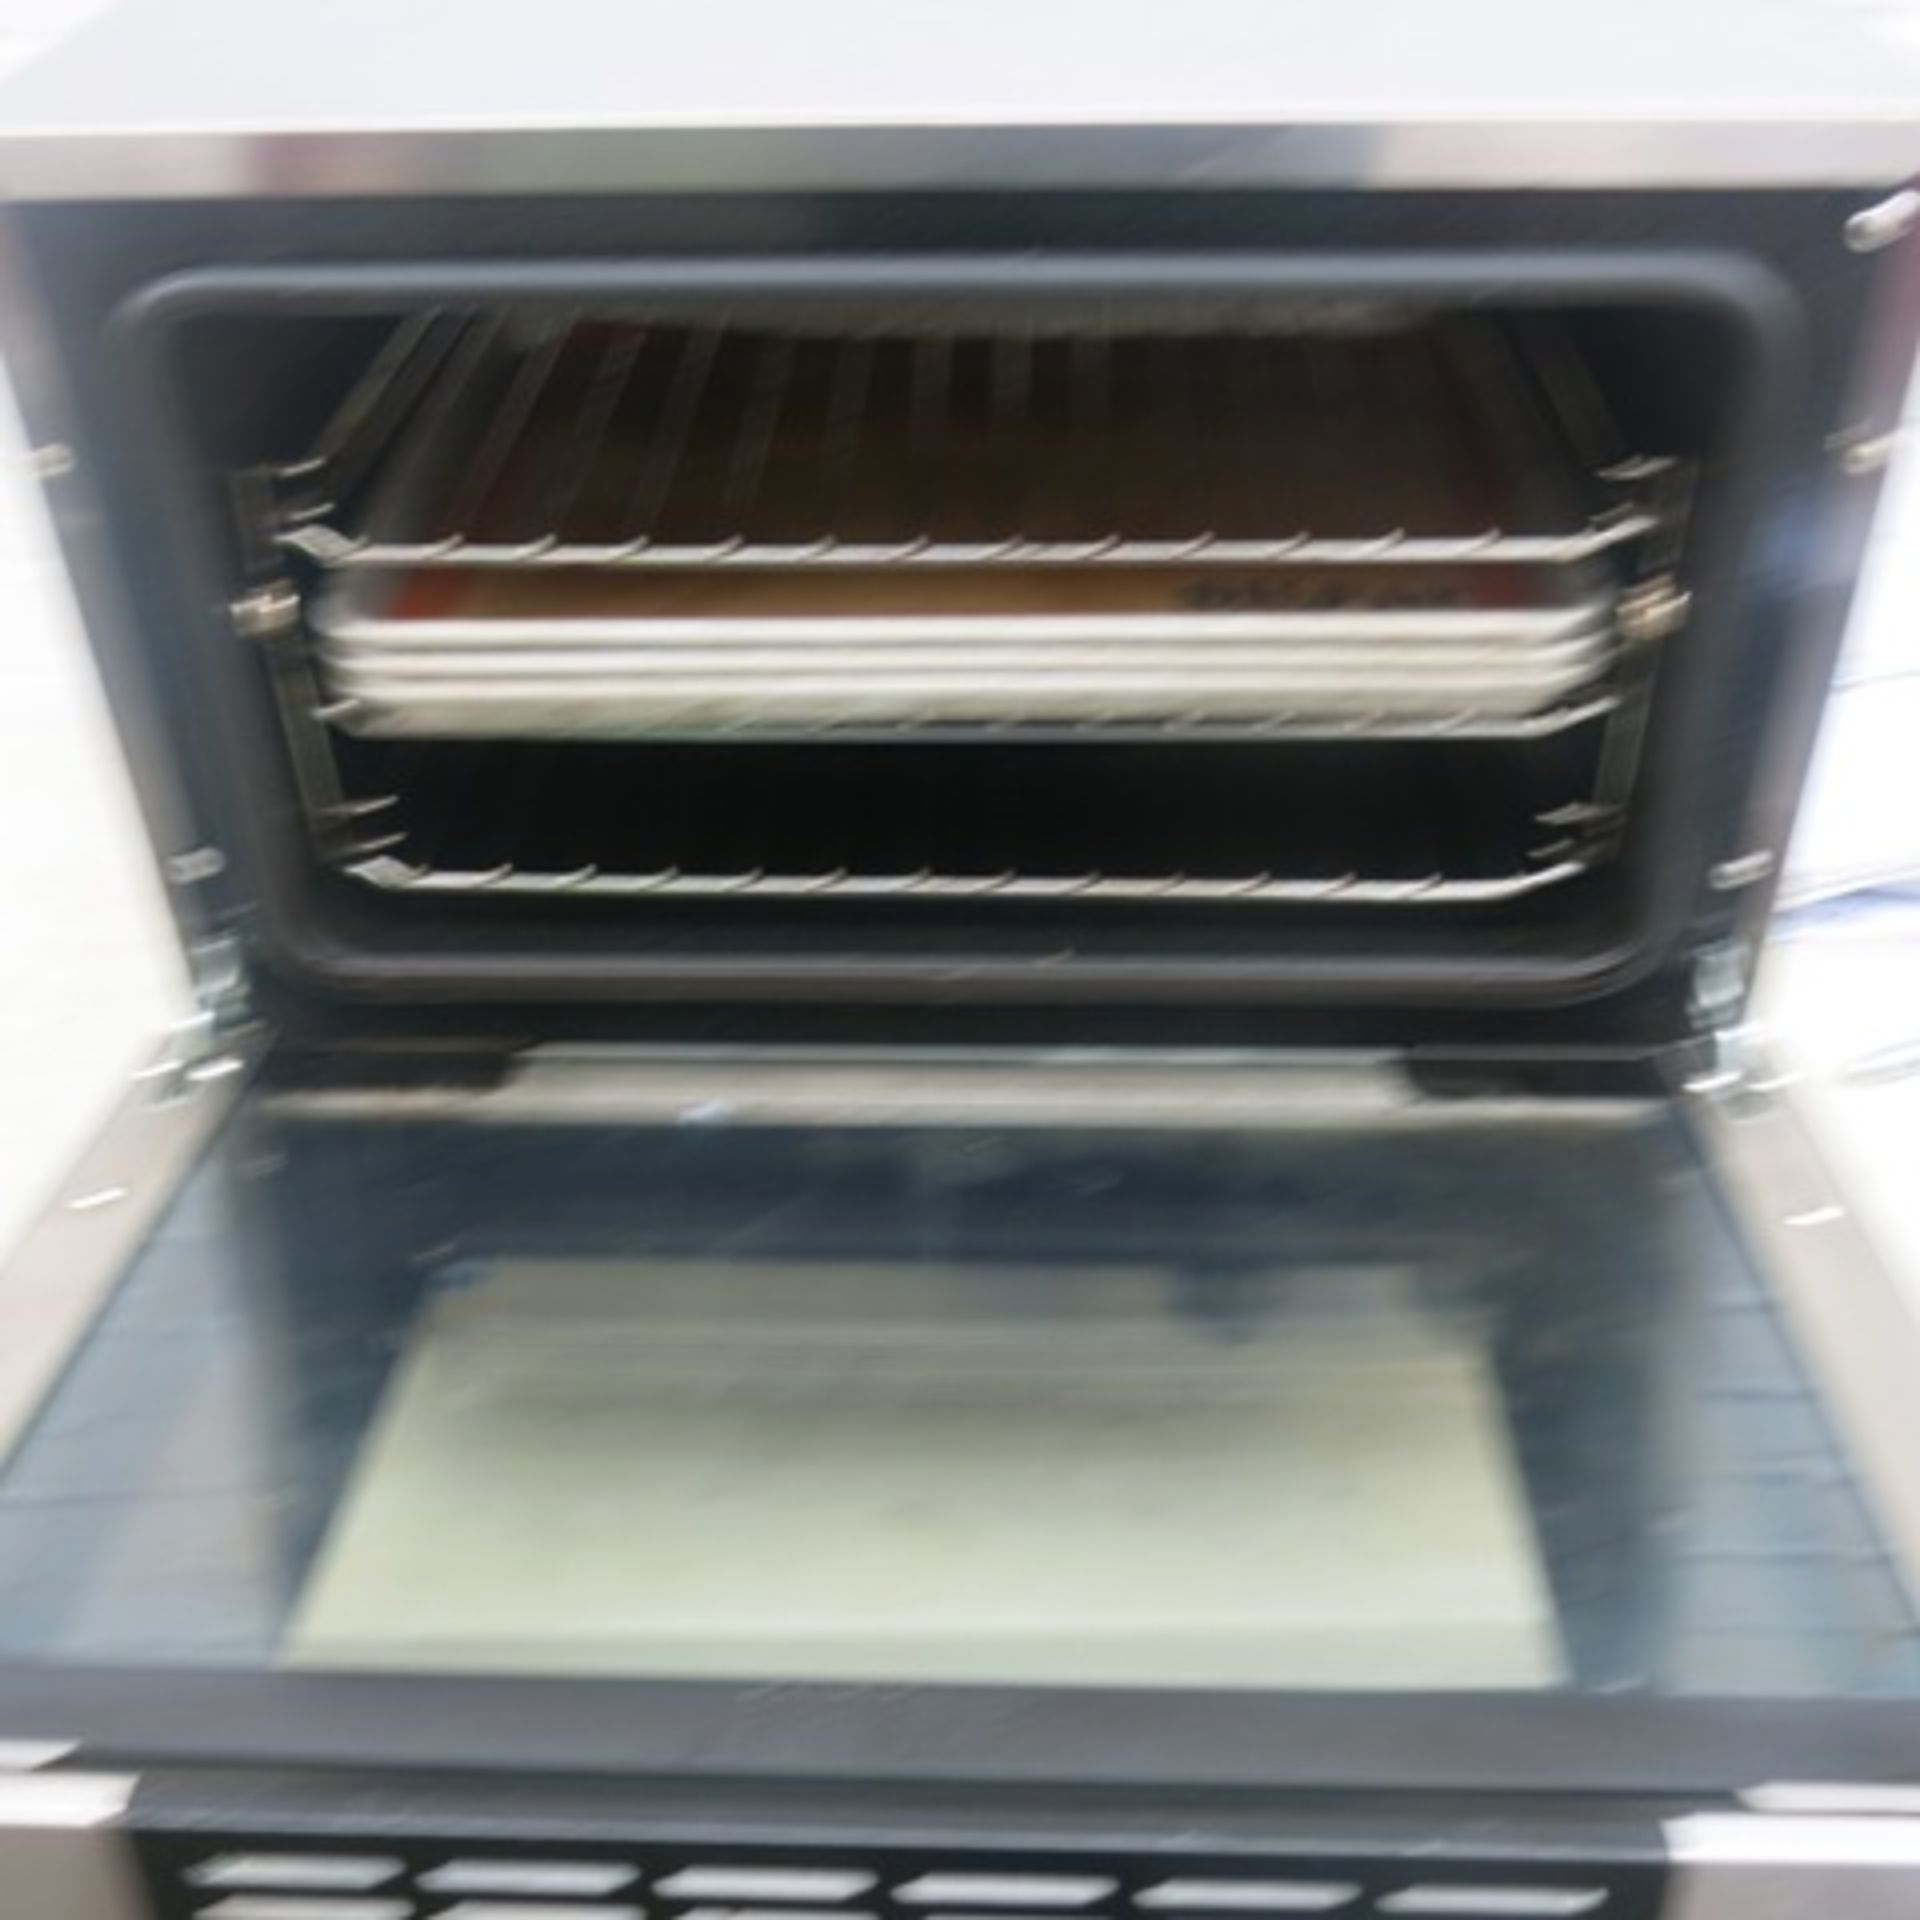 Blue Seal Counter Top Turbo Fan Convection Oven, Model E22M3. Comes with 3 Trays - Image 9 of 9